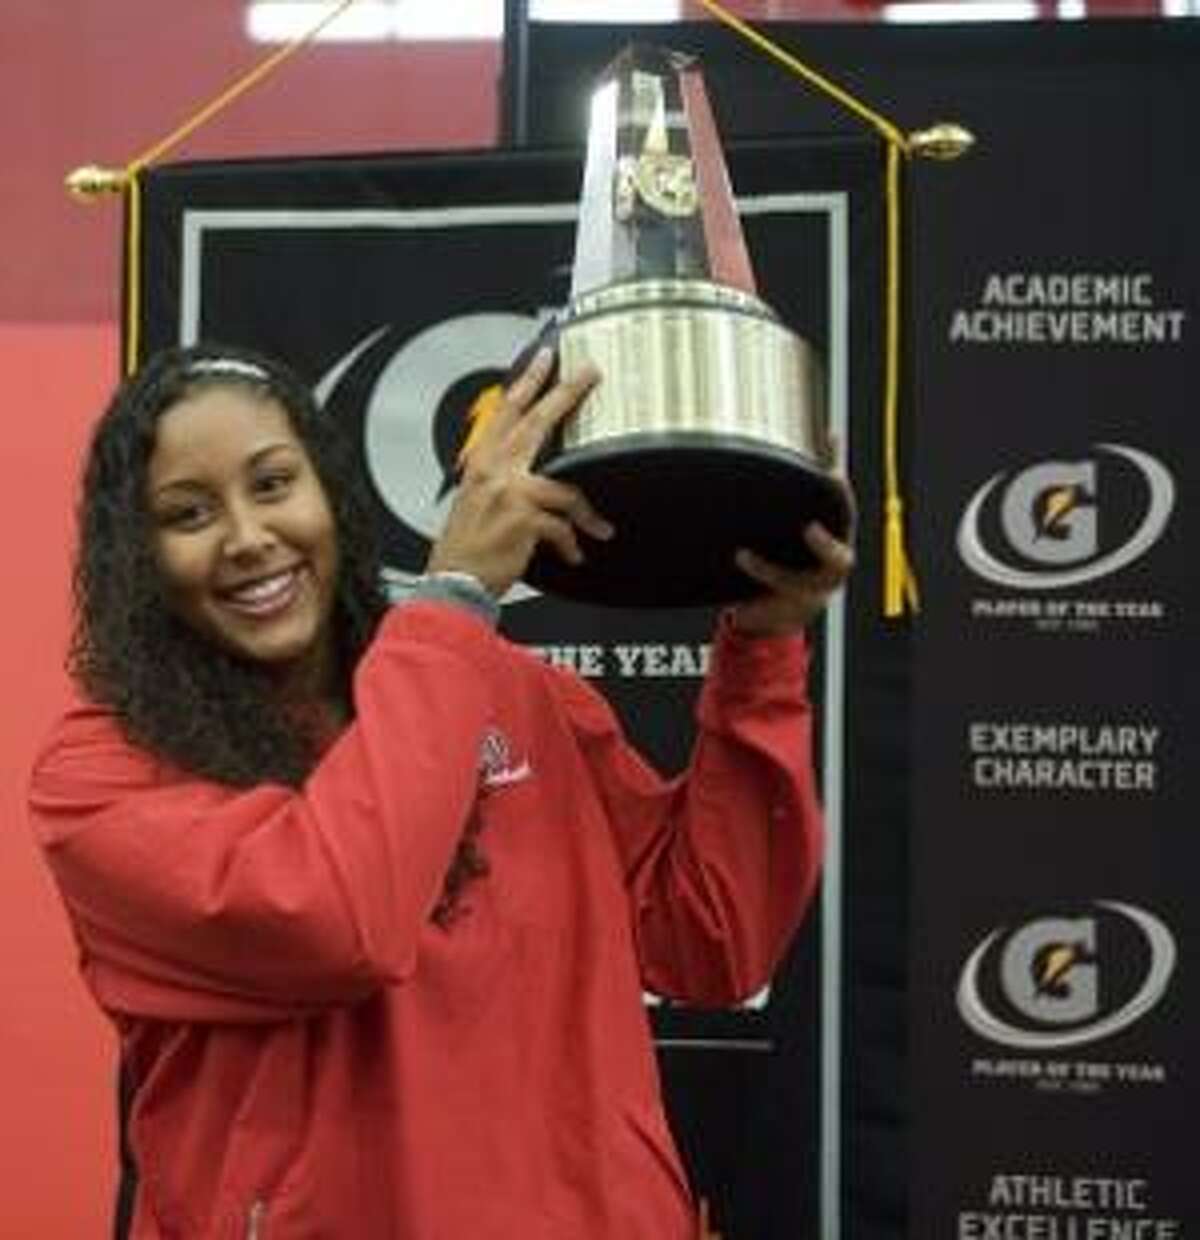 AP Kaleena Mosqueda-Lewis, of Mater Dei High School, receives the 2010-11 Gatorade National Girls Basketball Player of the Year award in Santa Ana, Calif., Thursday. Mosqueda-Lewis is a highly-regarded UConn recruit.